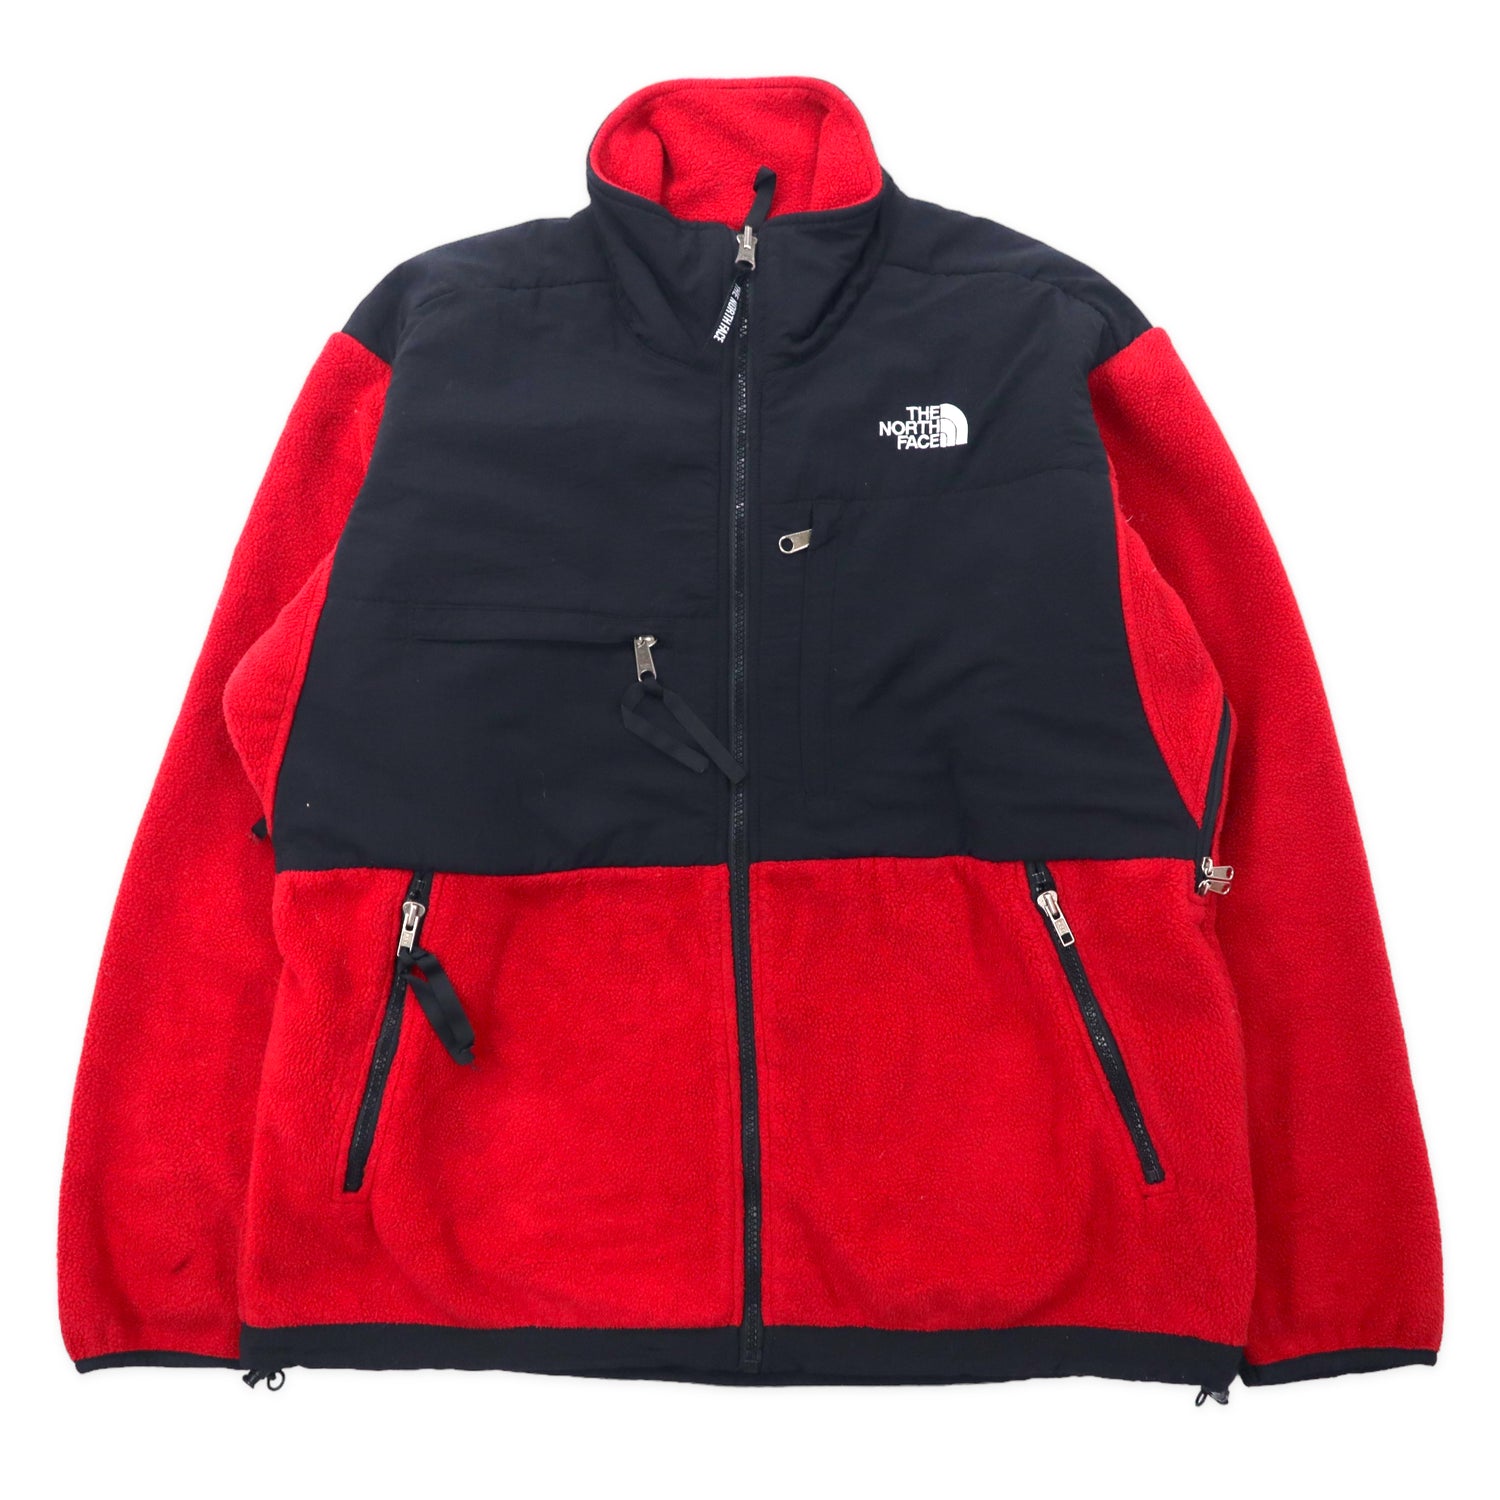 USA MADE THE NORTH FACE FLEECE Jacket M Red Black Polyester ...